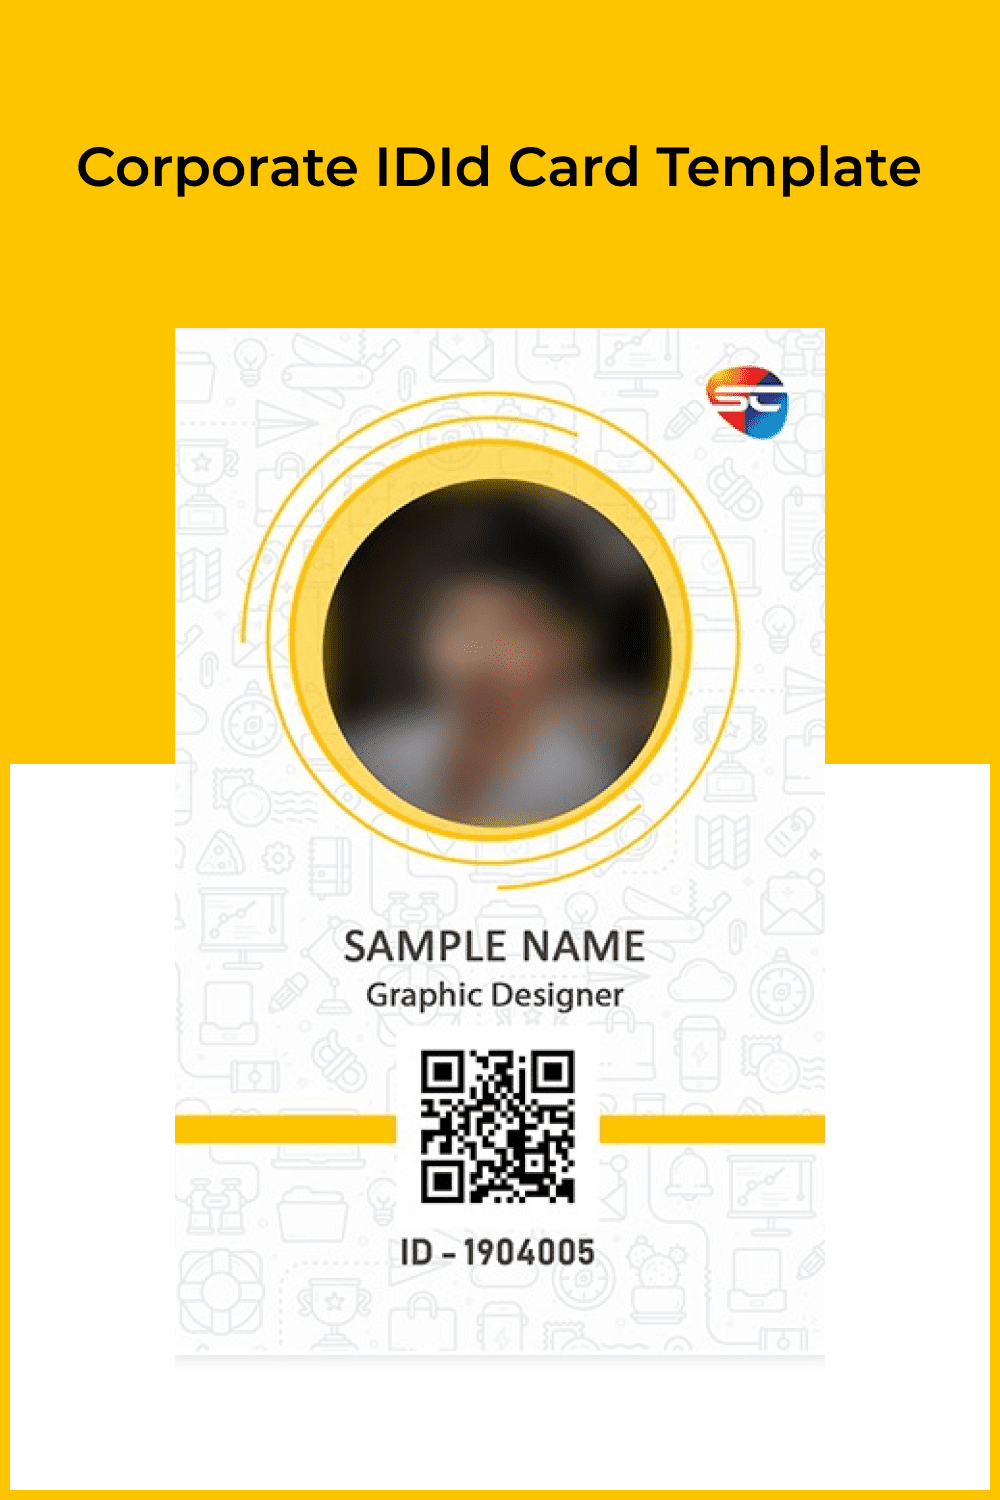 Light template with small details on the background and a yellow circle.